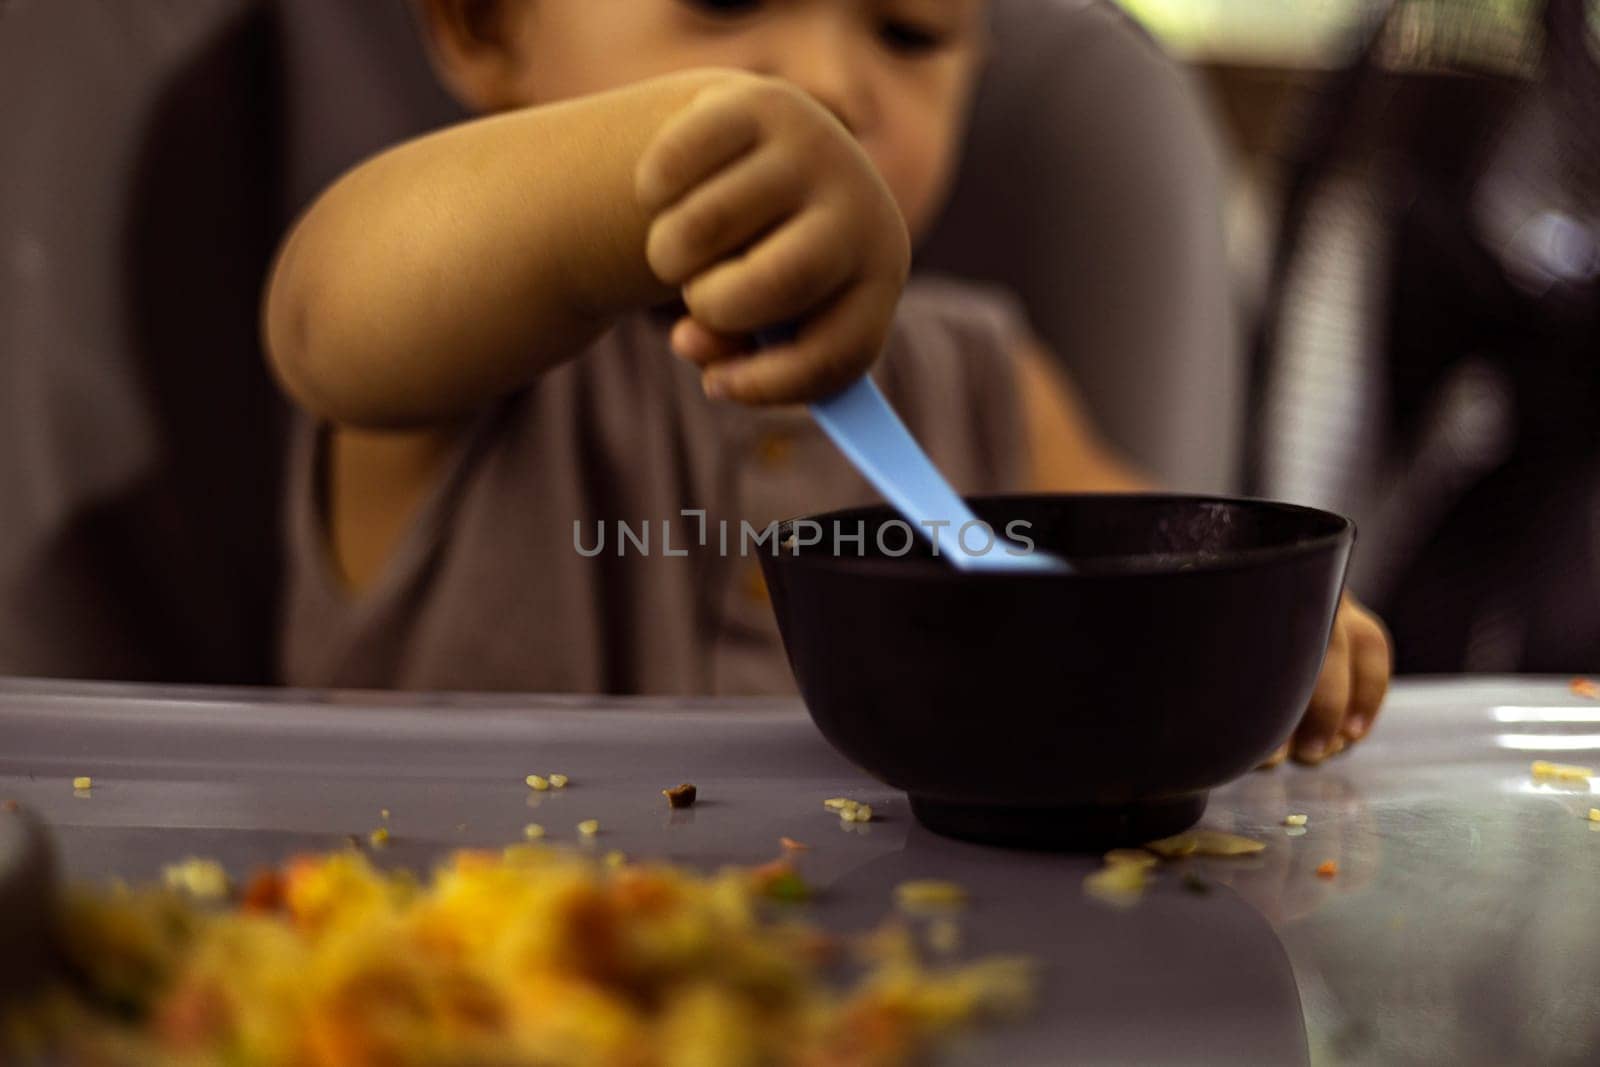 little Child Practices Scooping Food by urzine